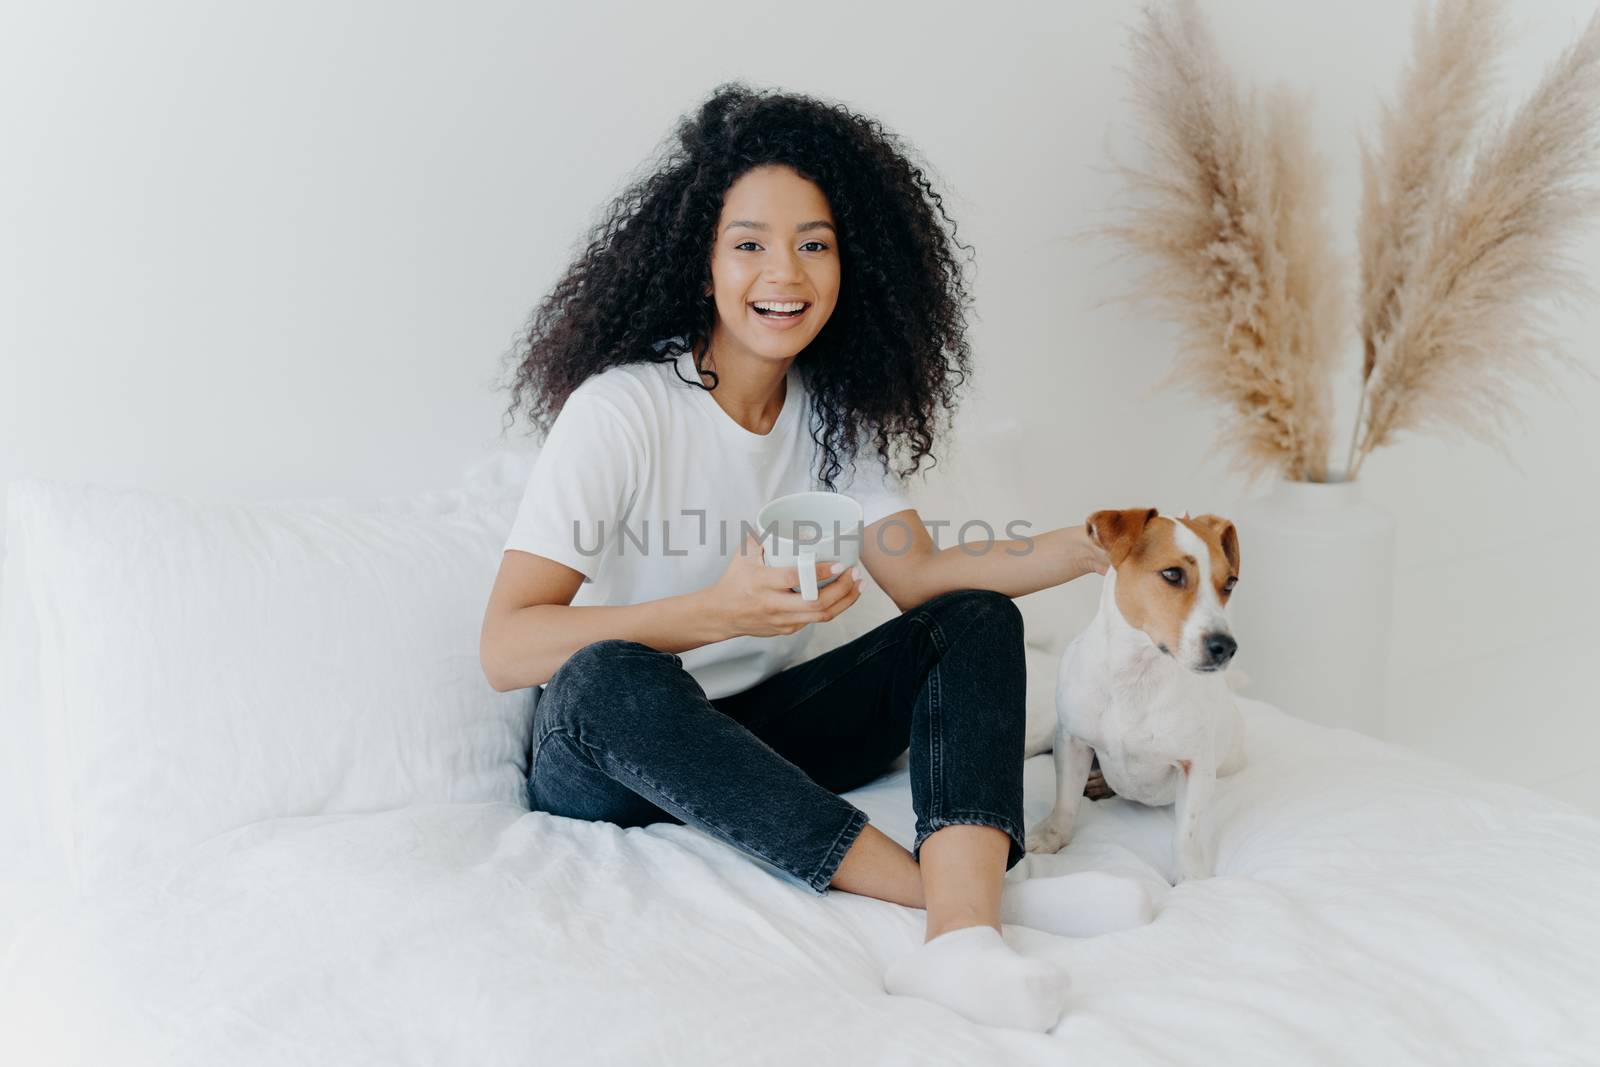 Happy relaxed lovely young woman with Afro hairstyle, petting dog, sit together on bed with white bedclothes, drink hot beverage, dressed in casual wear, expresses positive emotions. People and rest by vkstock